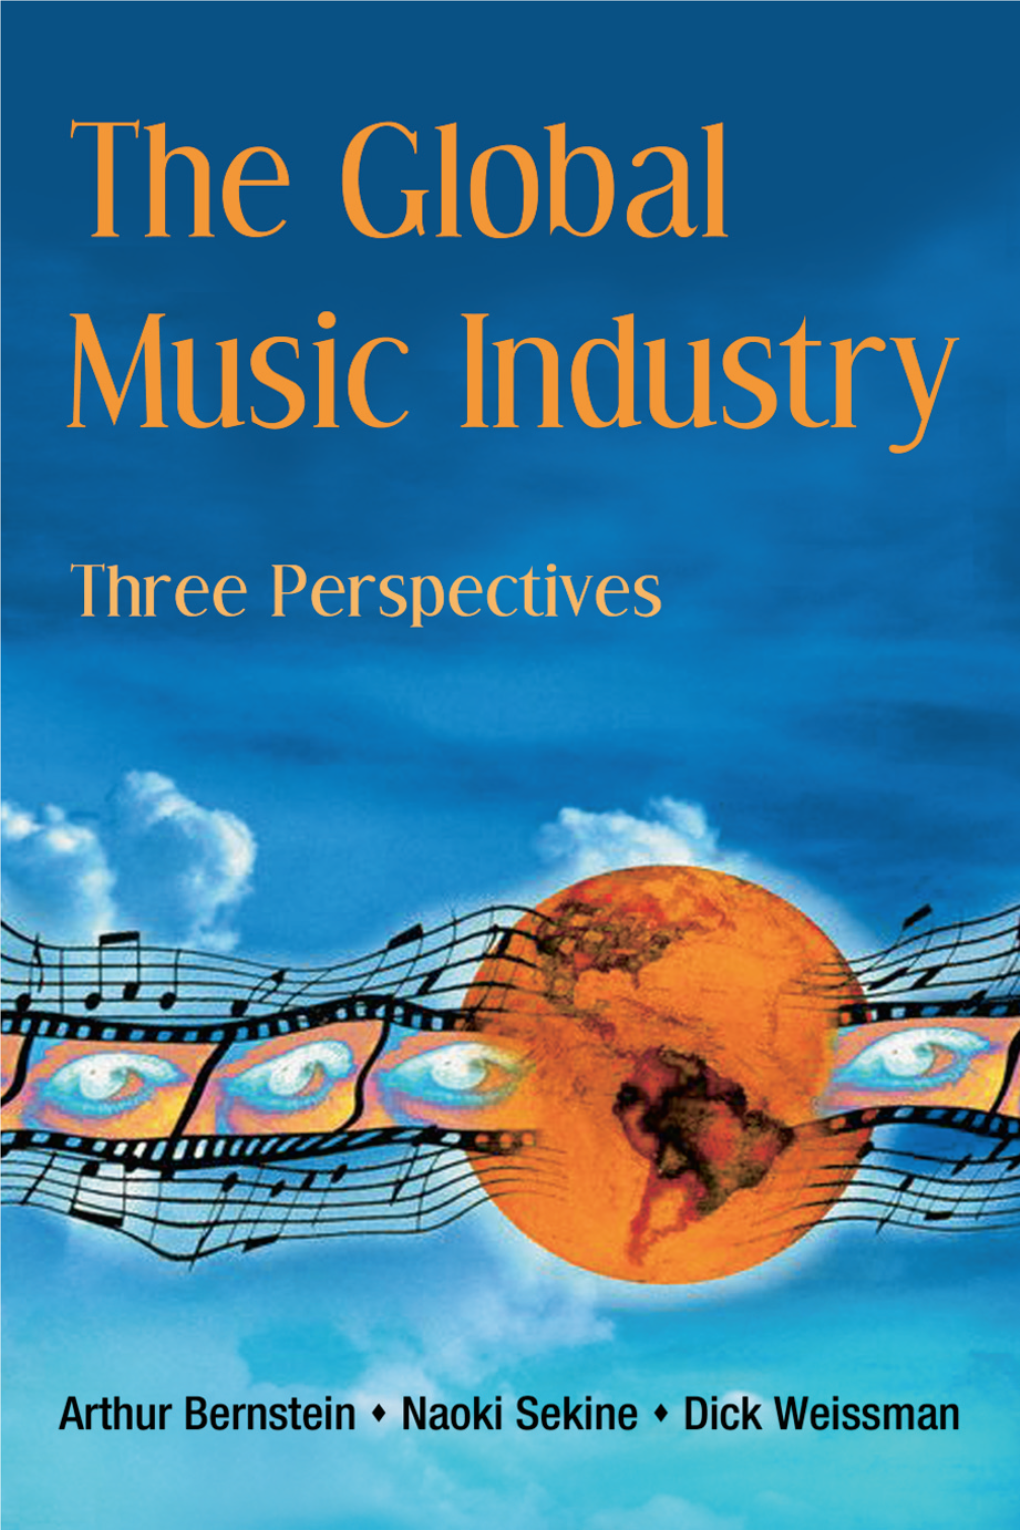 The Global Music Industry: Three Perspectives